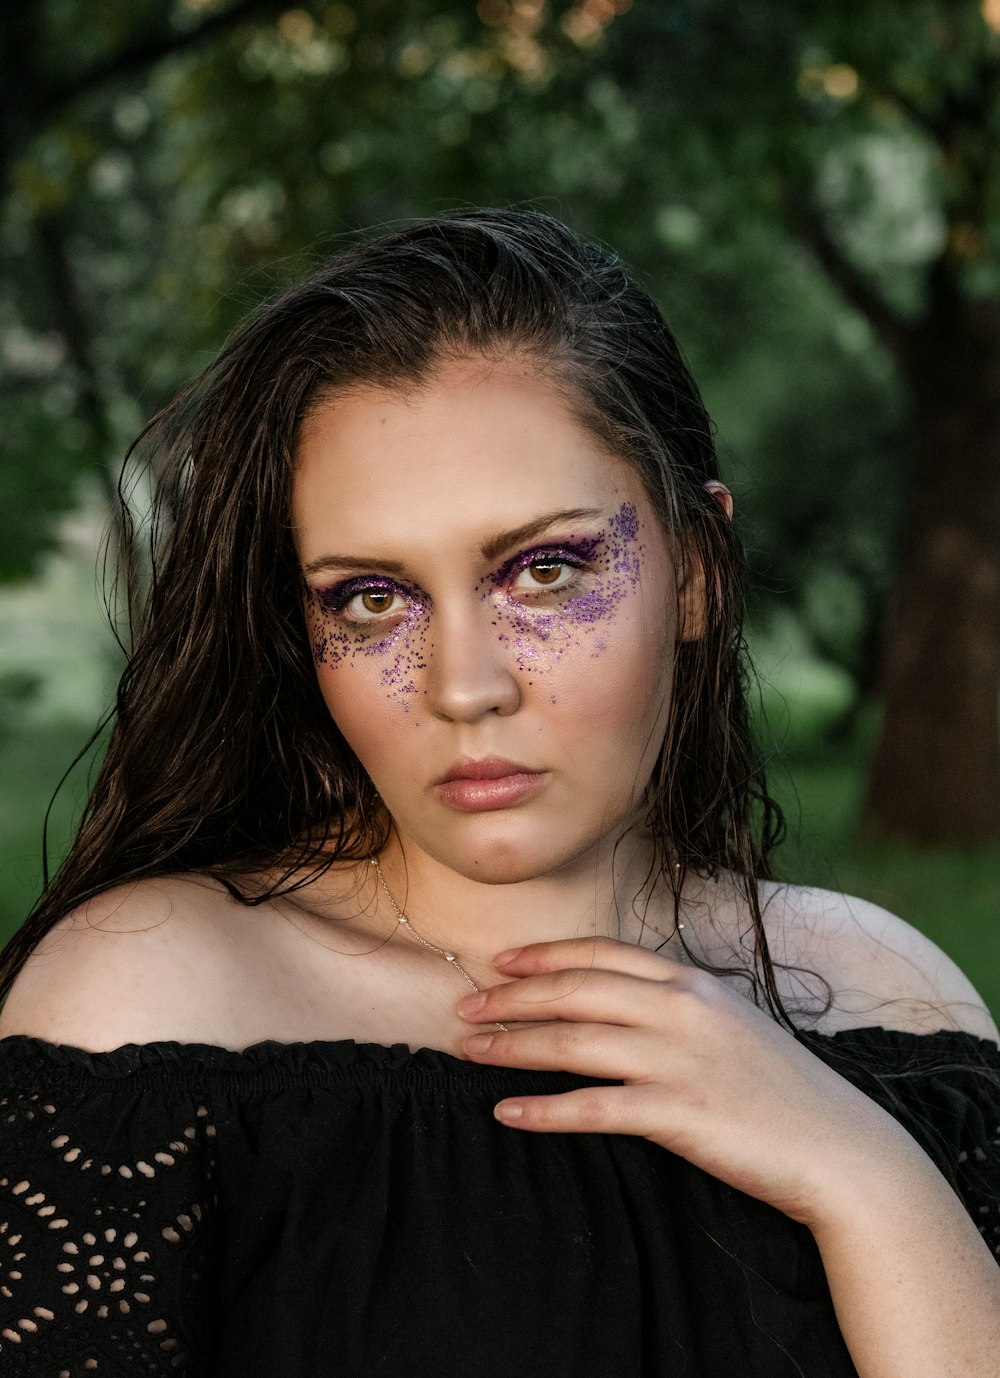 a woman with purple makeup and a black dress